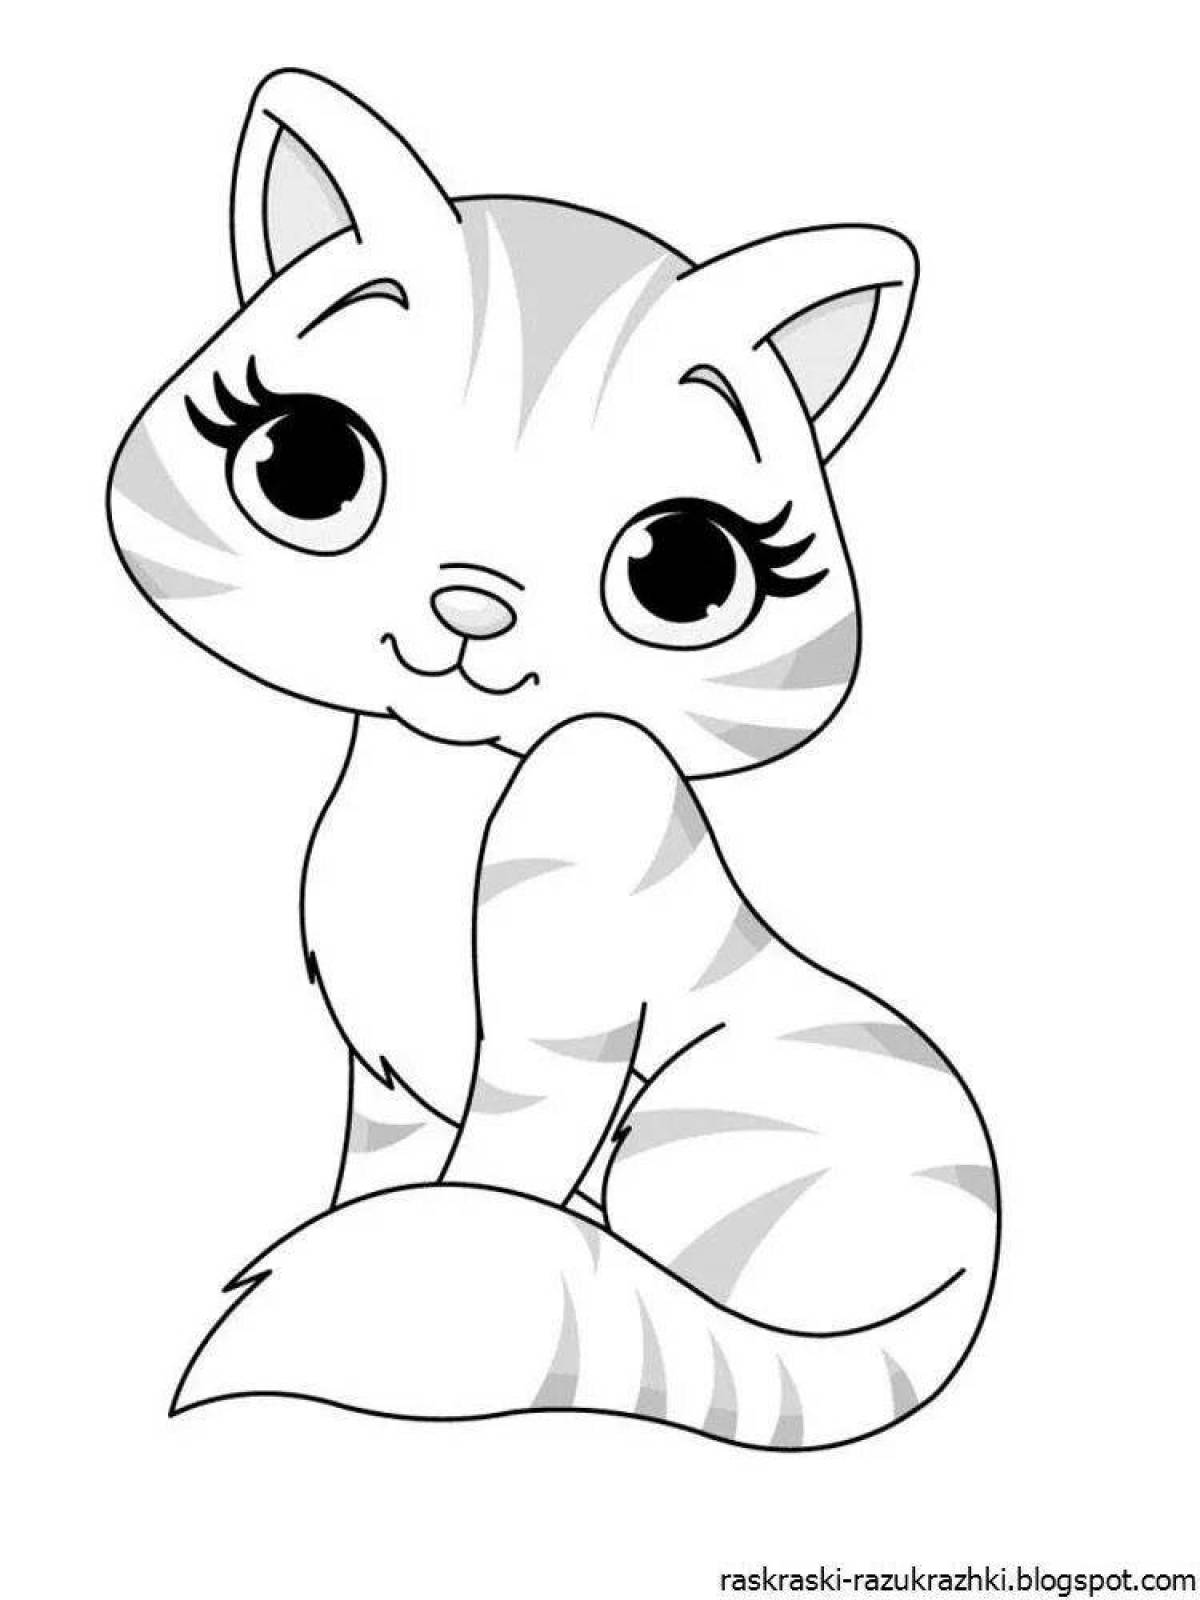 Snuggly kittens coloring page